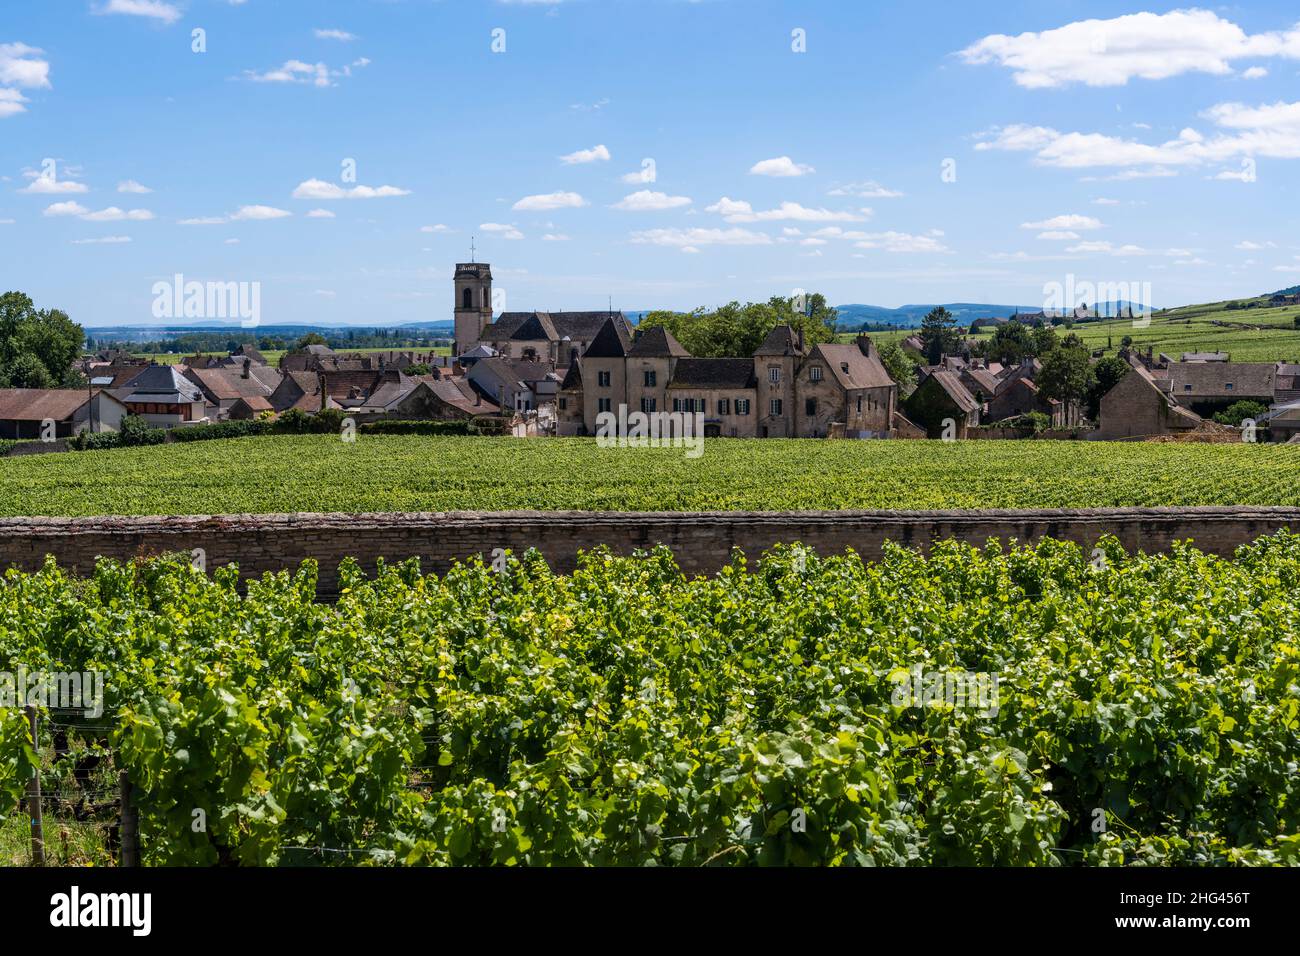 Vineyards and Rhone valley near the wine village of Pommard in Burgundy, France. Stock Photo